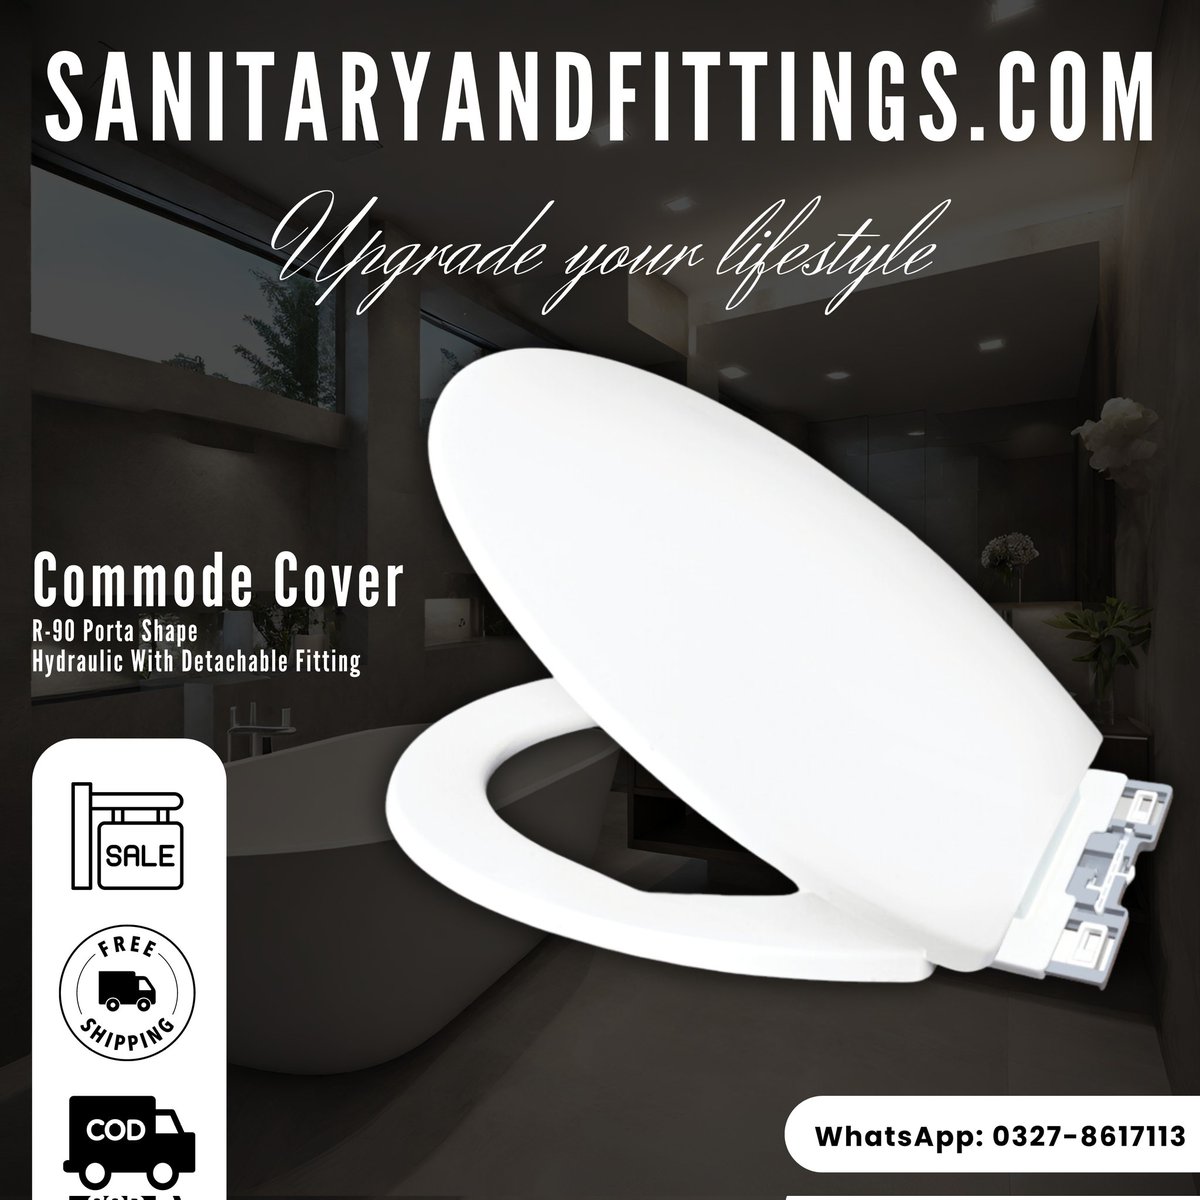 Product Code: R90 Seat Cover (Porta Shape)
Product Link: sanitaryandfittings.com/product/hydrau…

Free Shipping
Cash On Delivery

Star Collection
g.co/kgs/t4jGde

Contact: 0327-8617113

#sanitaryandfittings #bathroomaccessories #bathroomimprovement #toiletseatcover #washroomdecor